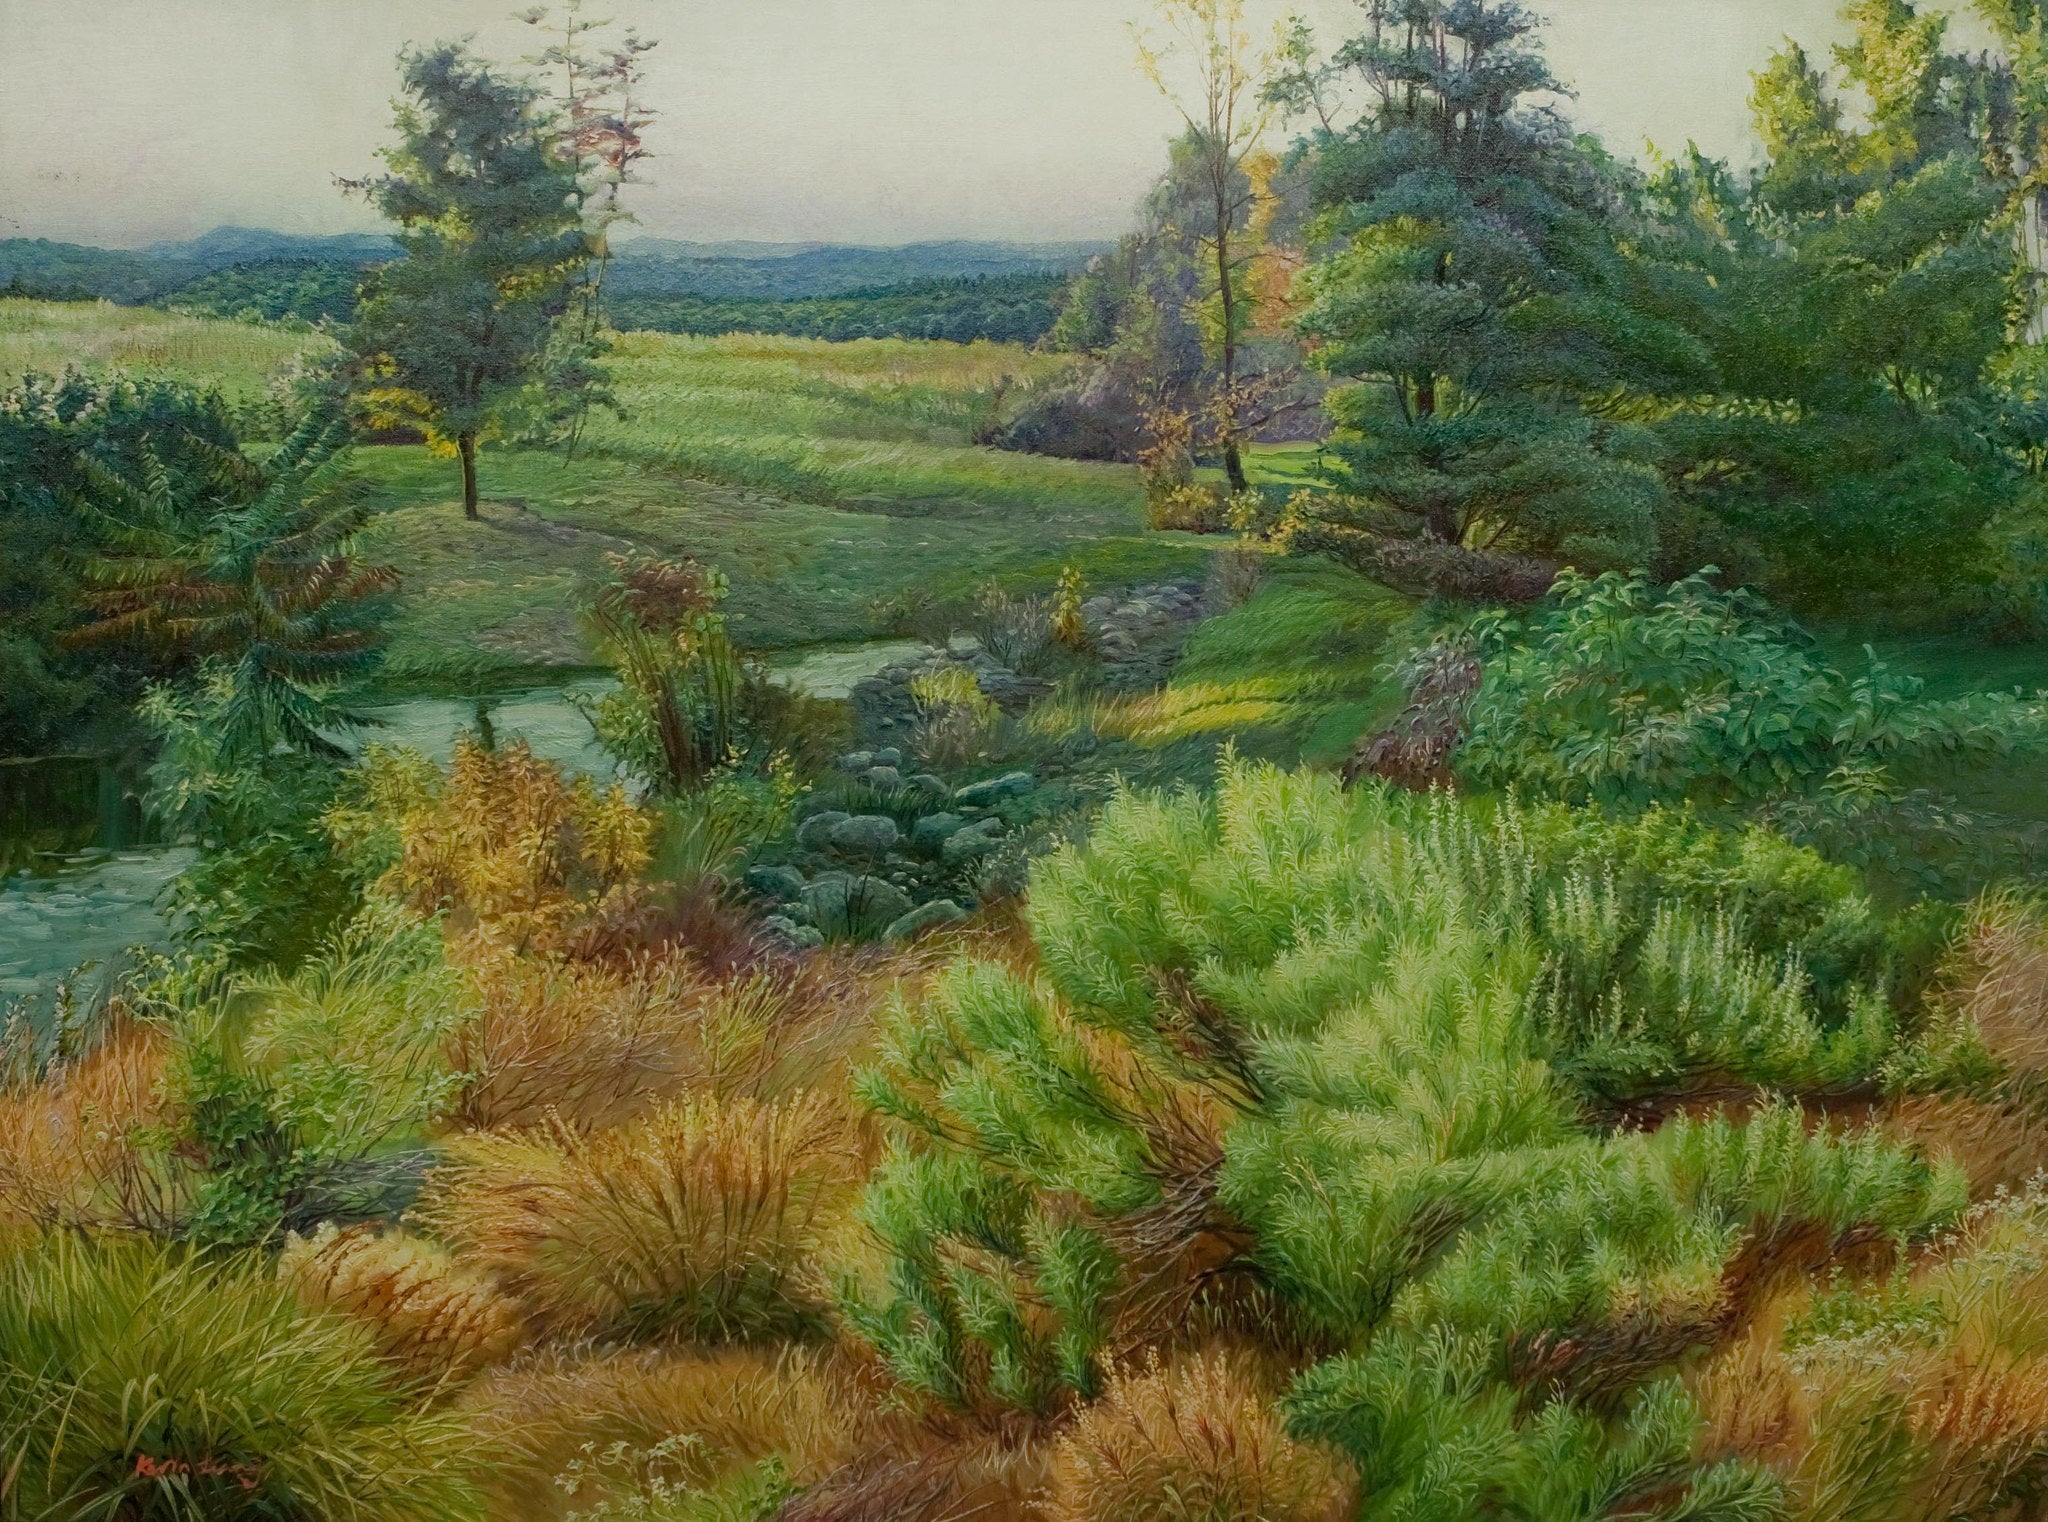 "Summer Vista"  Kevin Liang  2004  Original oil on canvas with frame 36" x 46".